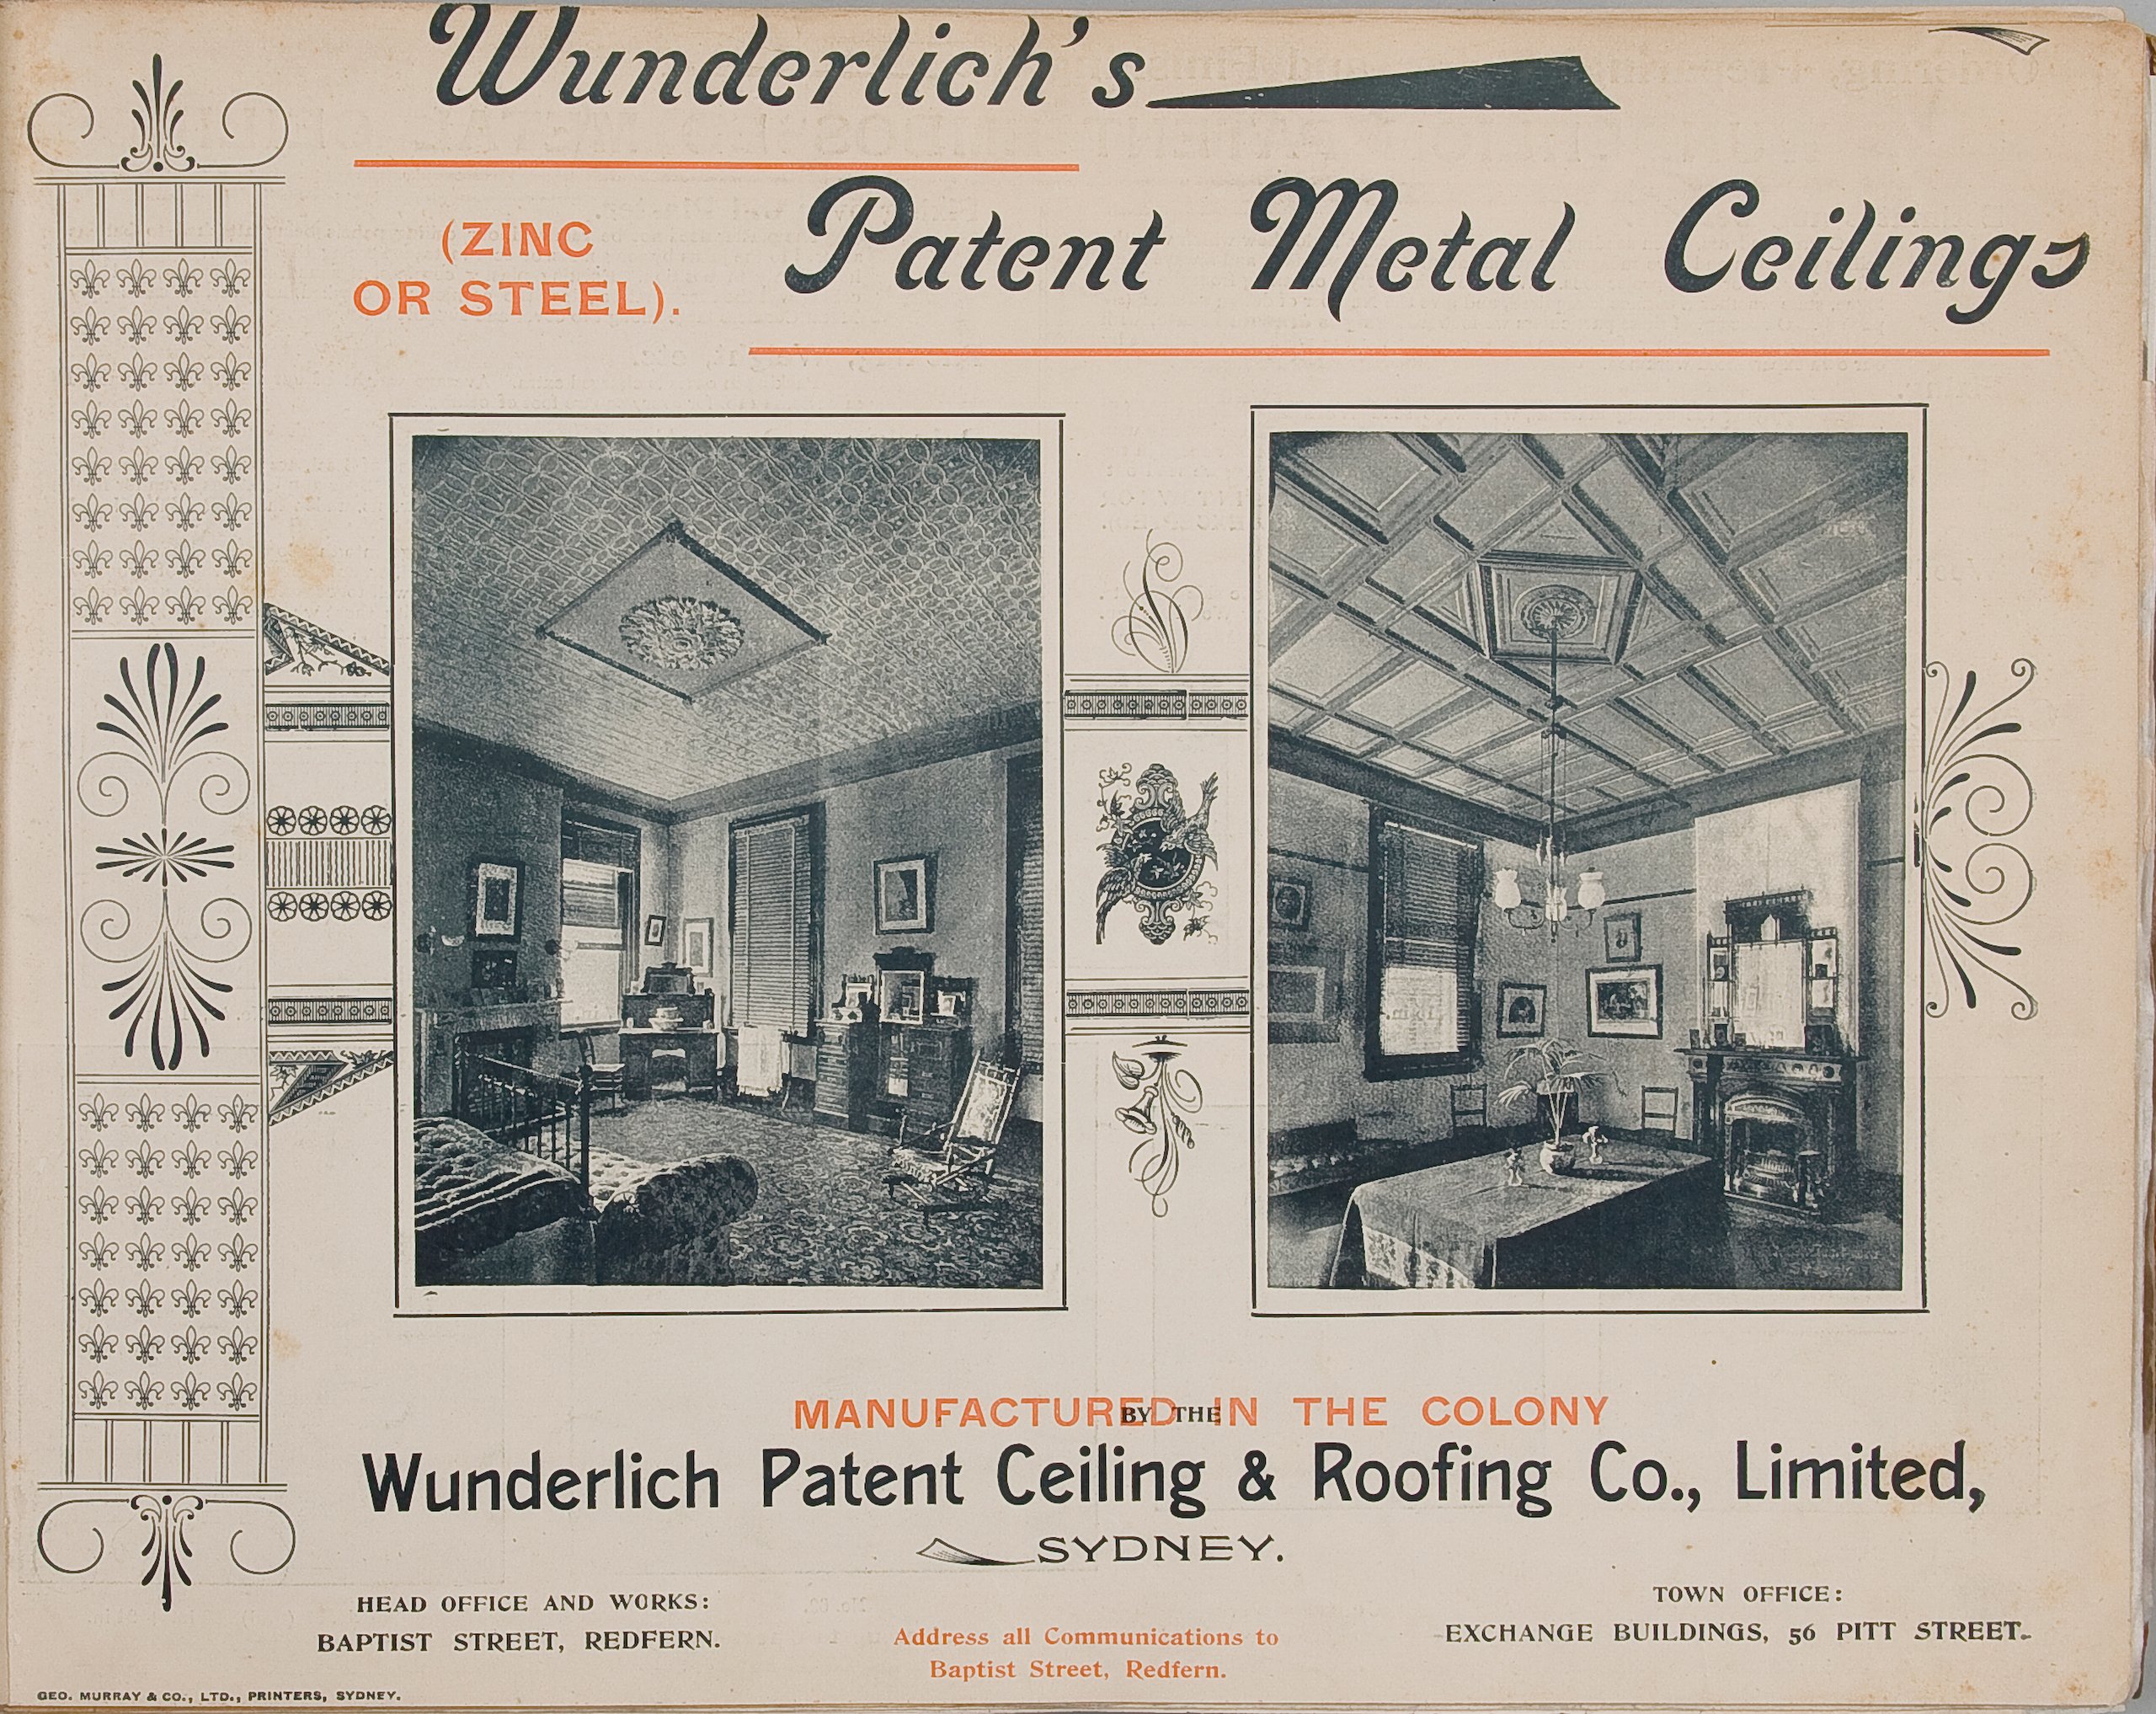 Front cover from Wunderlich catalogue 'Patent Metal Ceilings'